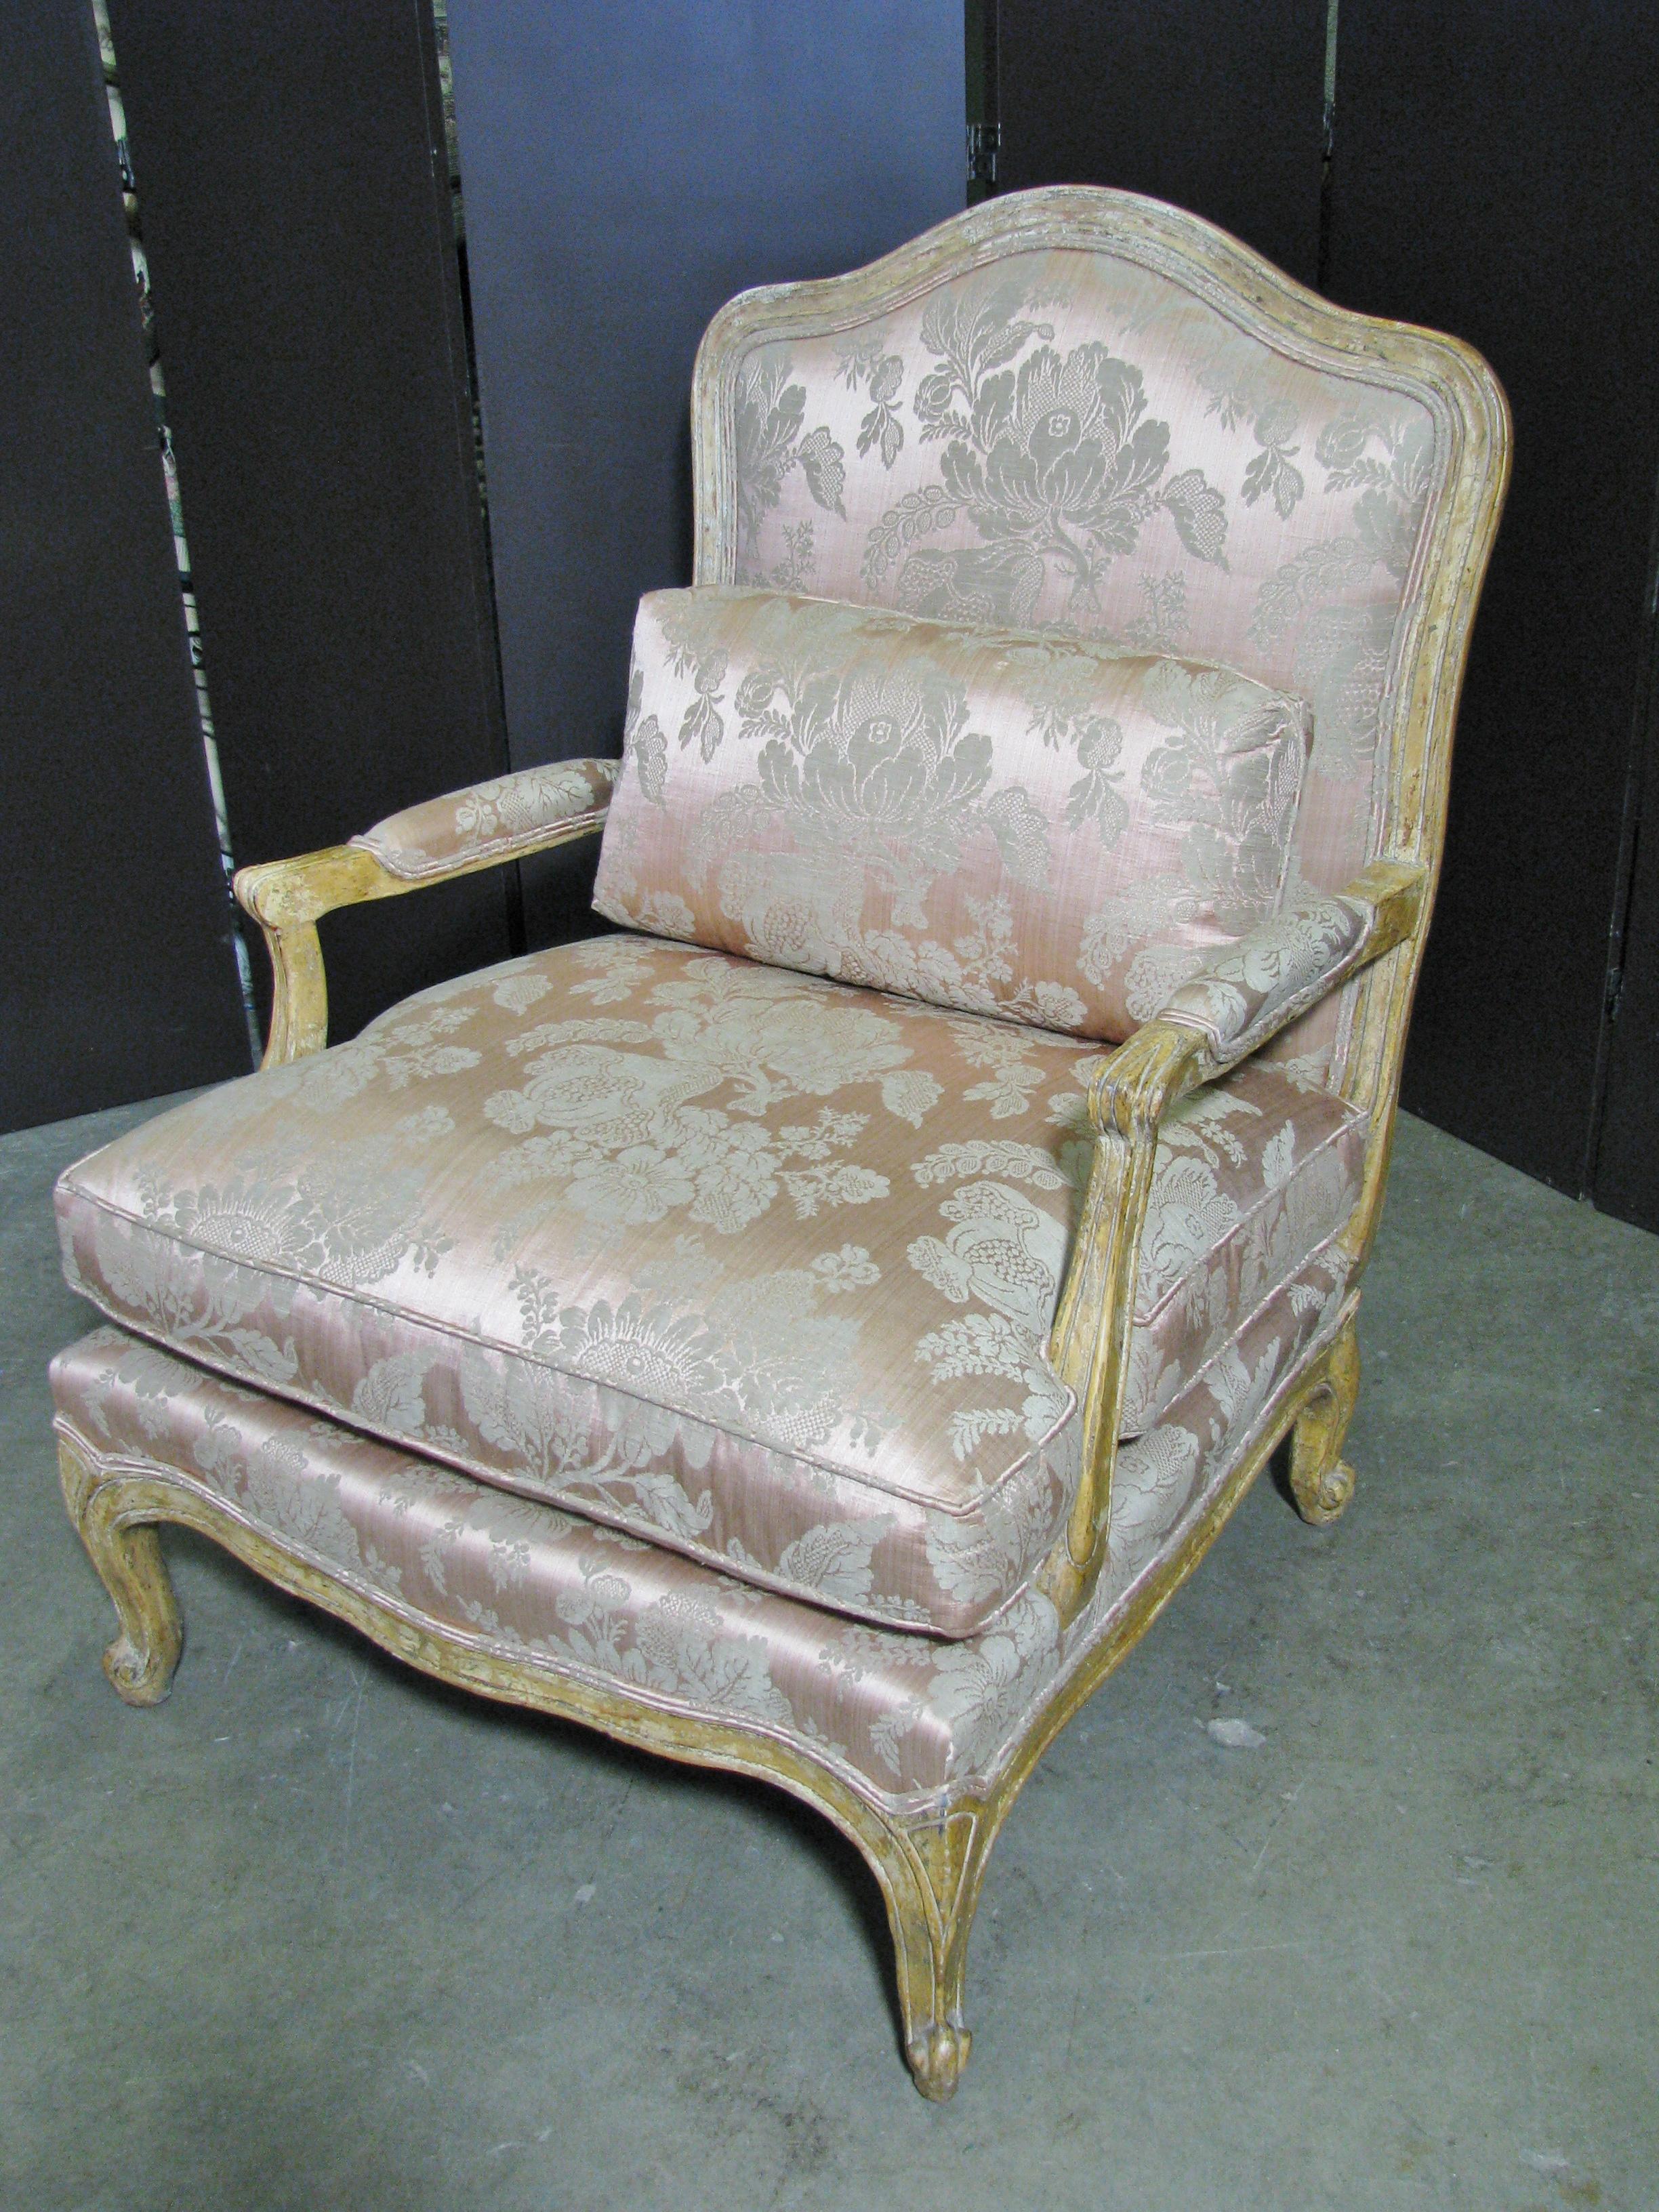 Stunning pair of French style armchairs by high-end custom furniture maker Minton-Spidell. Finished in a distressed, flaky ochre finish, with a convincing aged look. Intentional wear allow wood and a whisper of a blue-green color show through. The